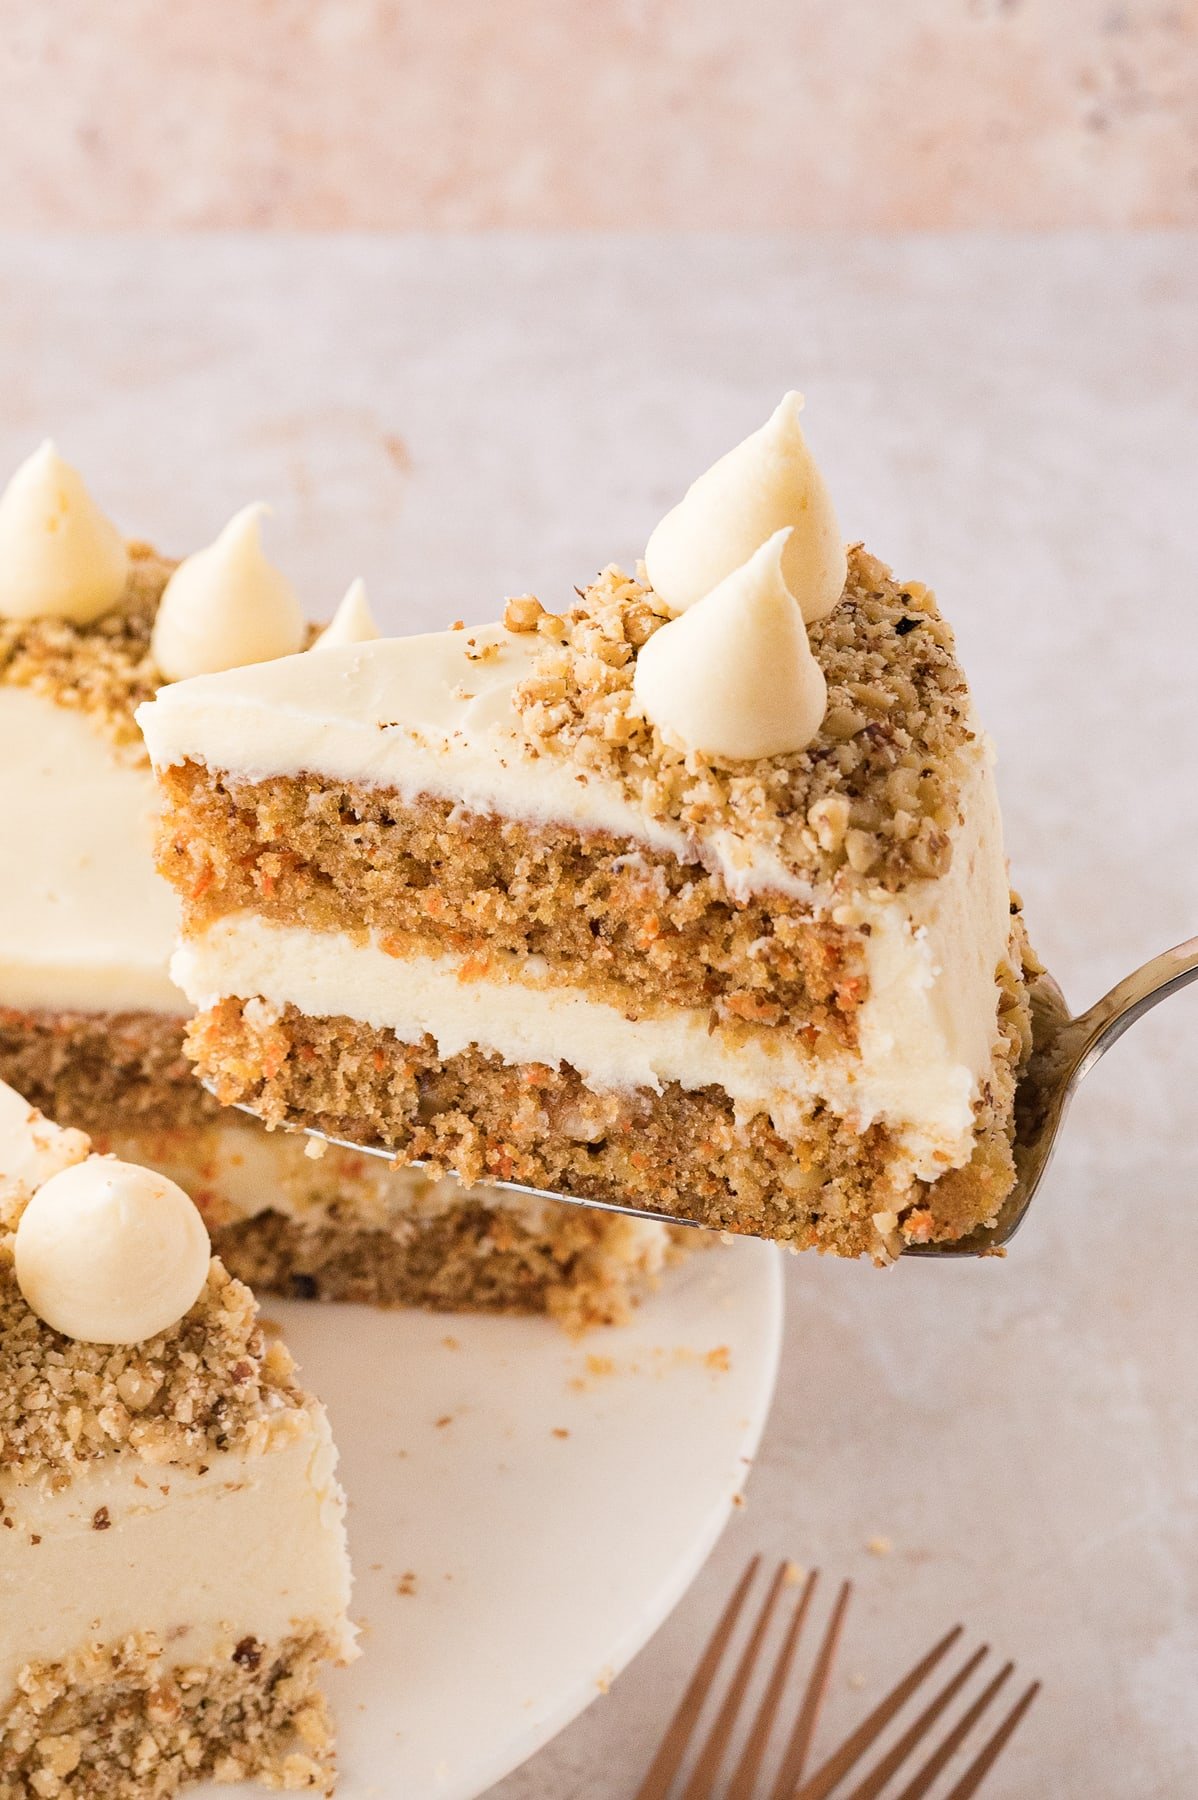 A slice of carrot cake being served